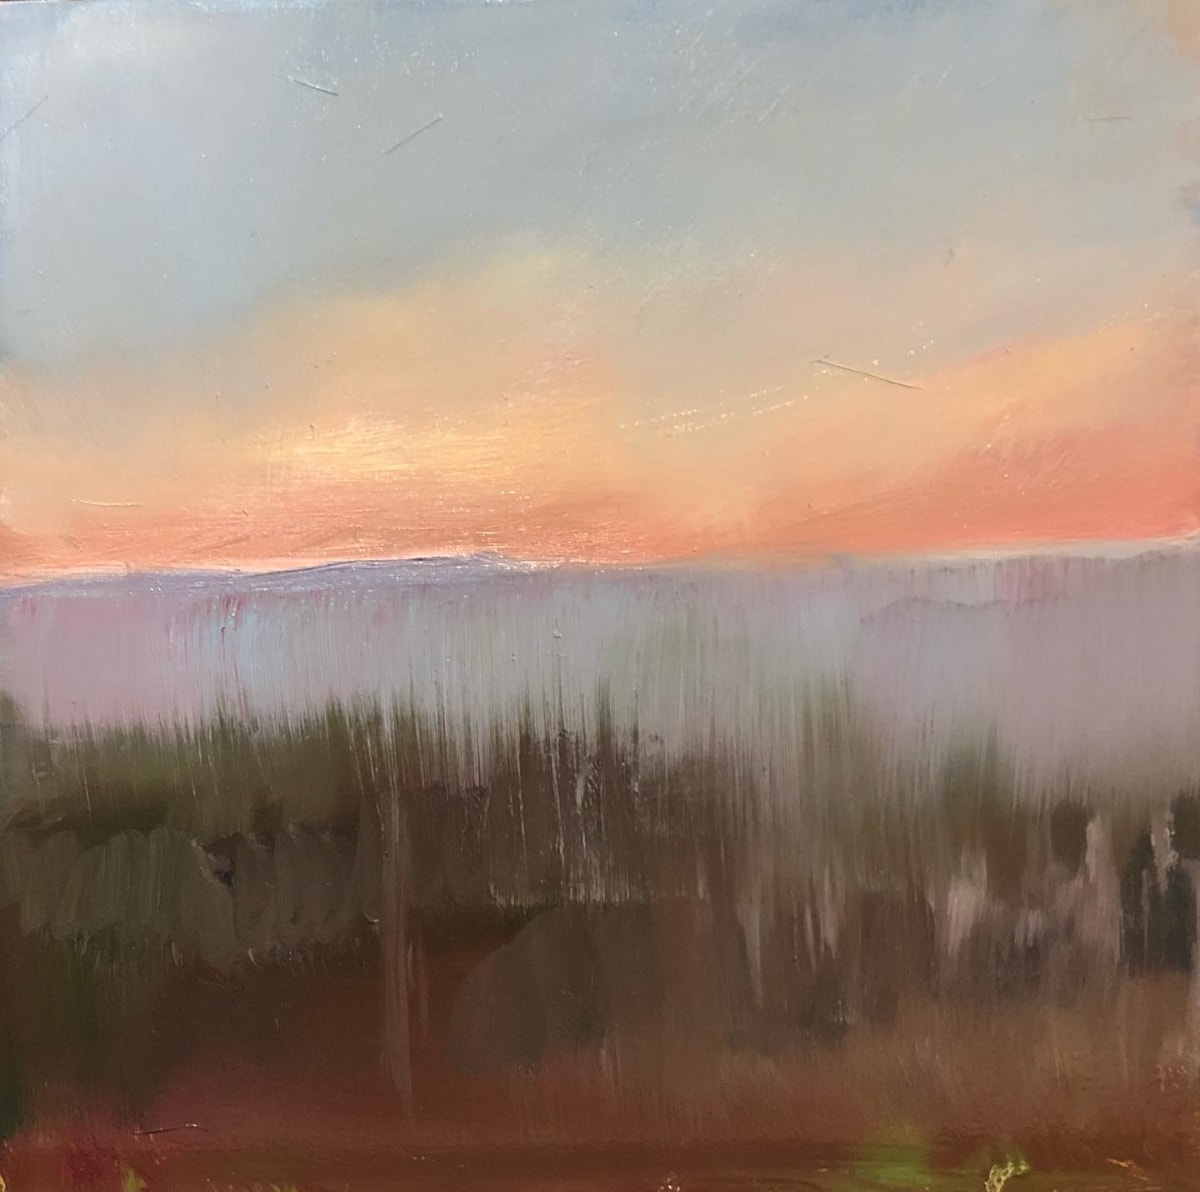 small scape-low country #4 by Rebecca Jacob  Image: Scape Sketch Collection-special places on my journey of life

scape sketch-low country #4

6x6 oil on ampersand museum gesso panel 2022

This painting was inspired by the views of the marshlands in the low country of South Carolina.